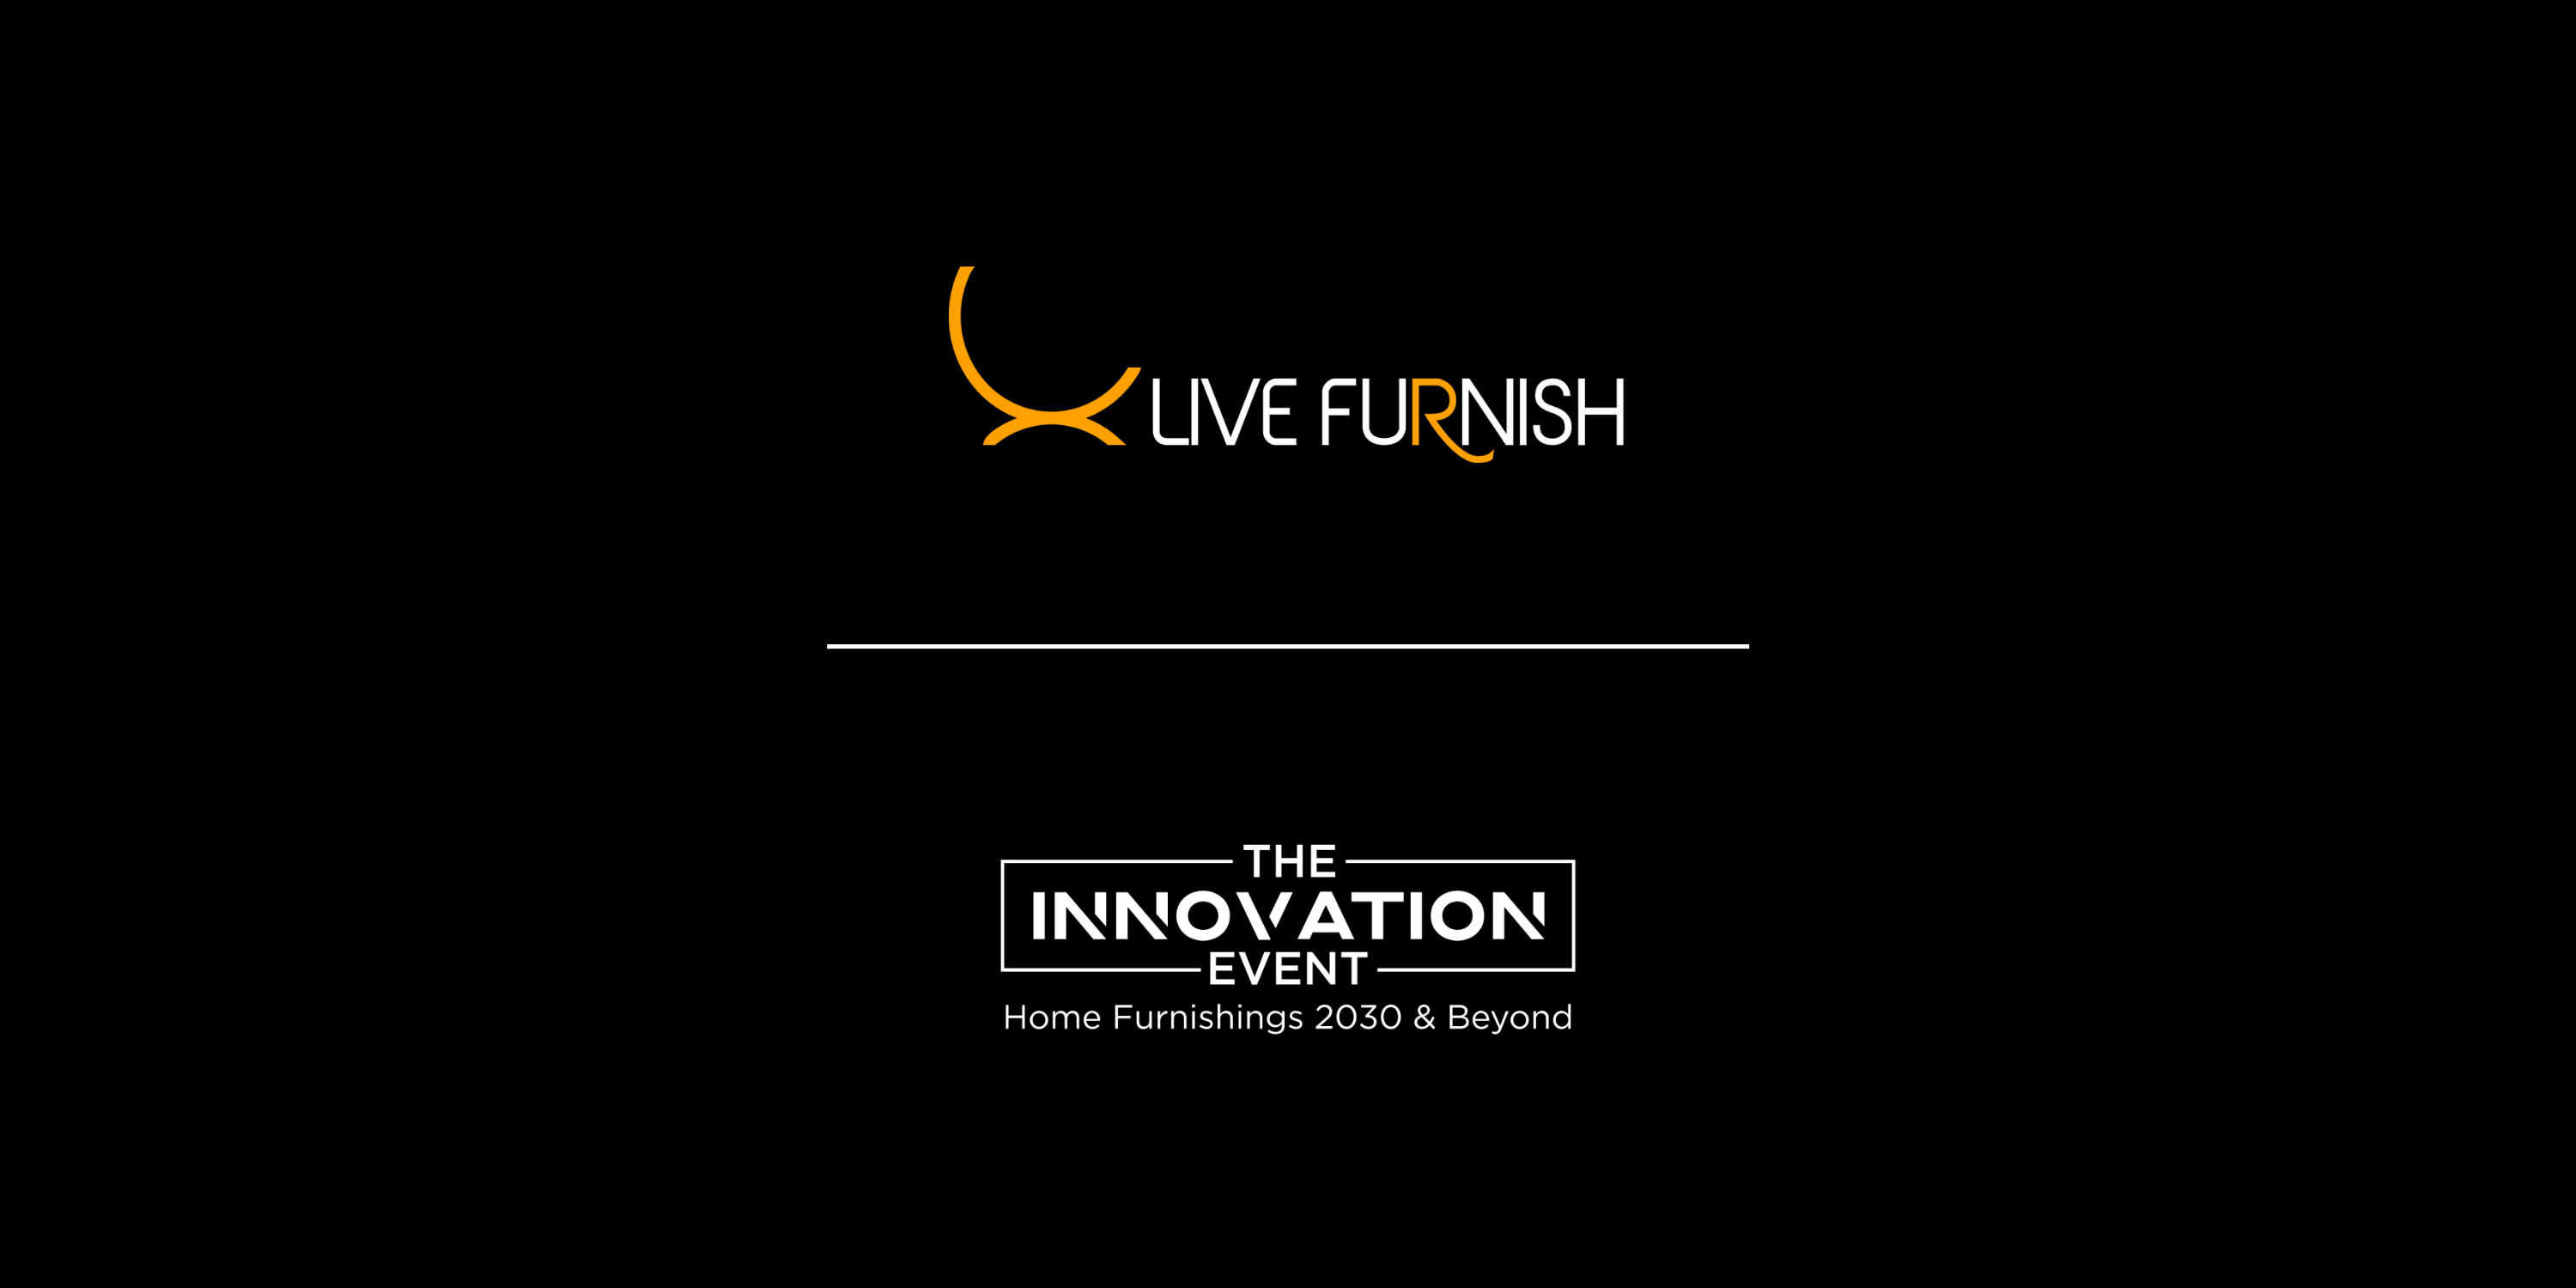 Innovation Event and Live Furnish Logos